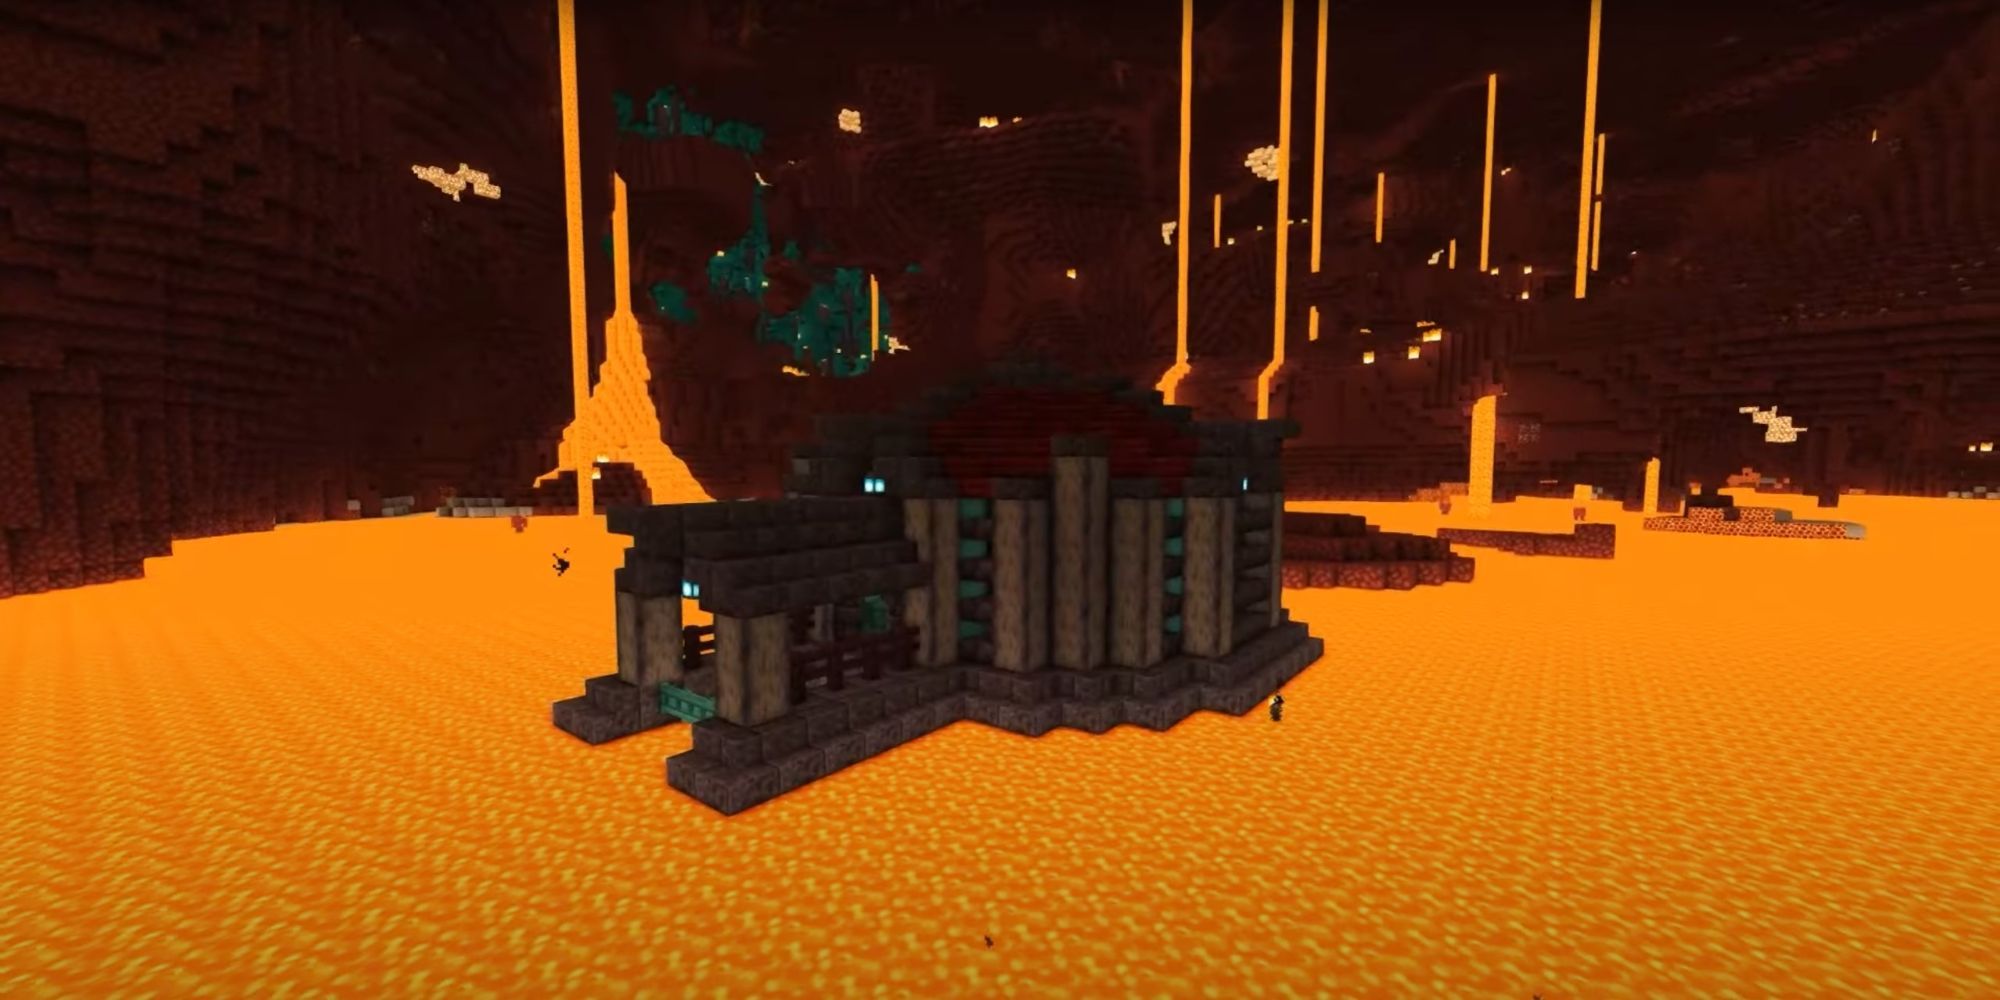 An image from Minecraft of a Small Nether Base, which is built on a lava lake and has a pen to hold striders.